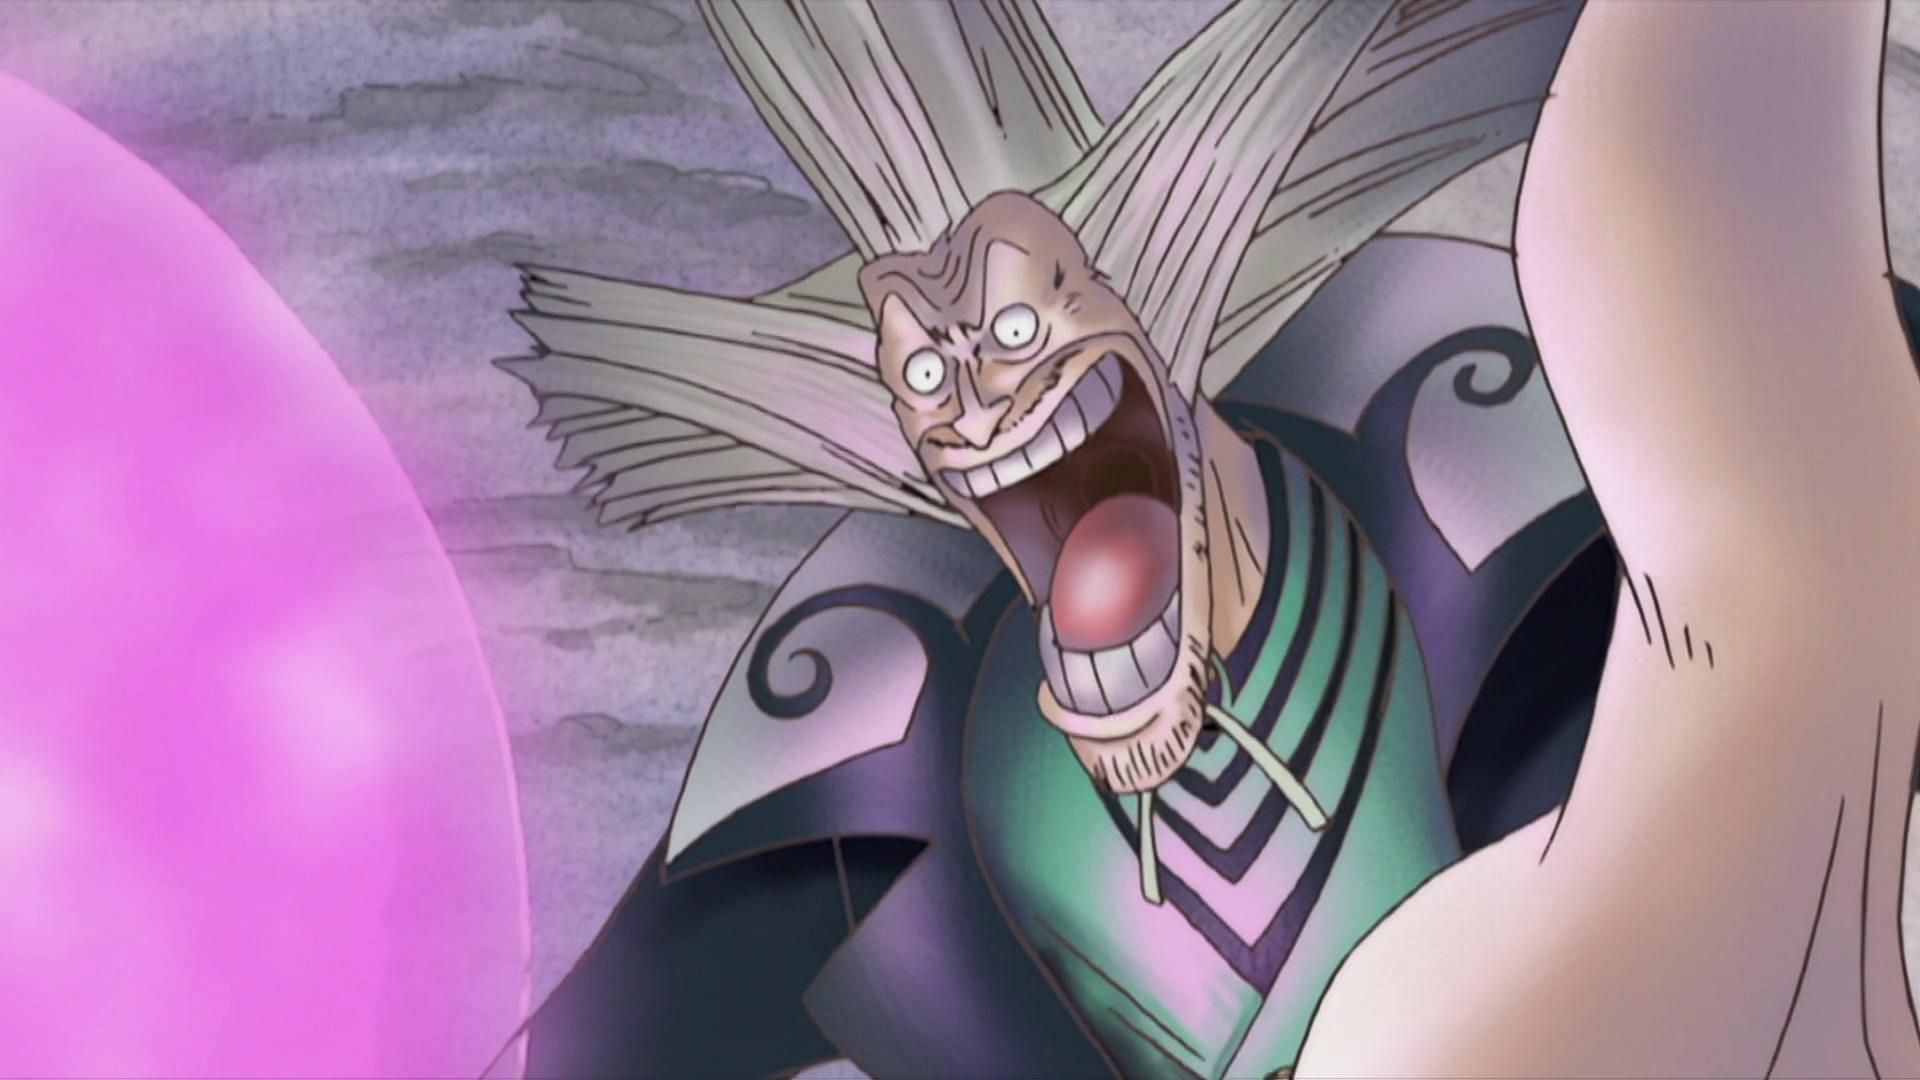 Hiluluk as shown in the anime (Image via Toei Animation)